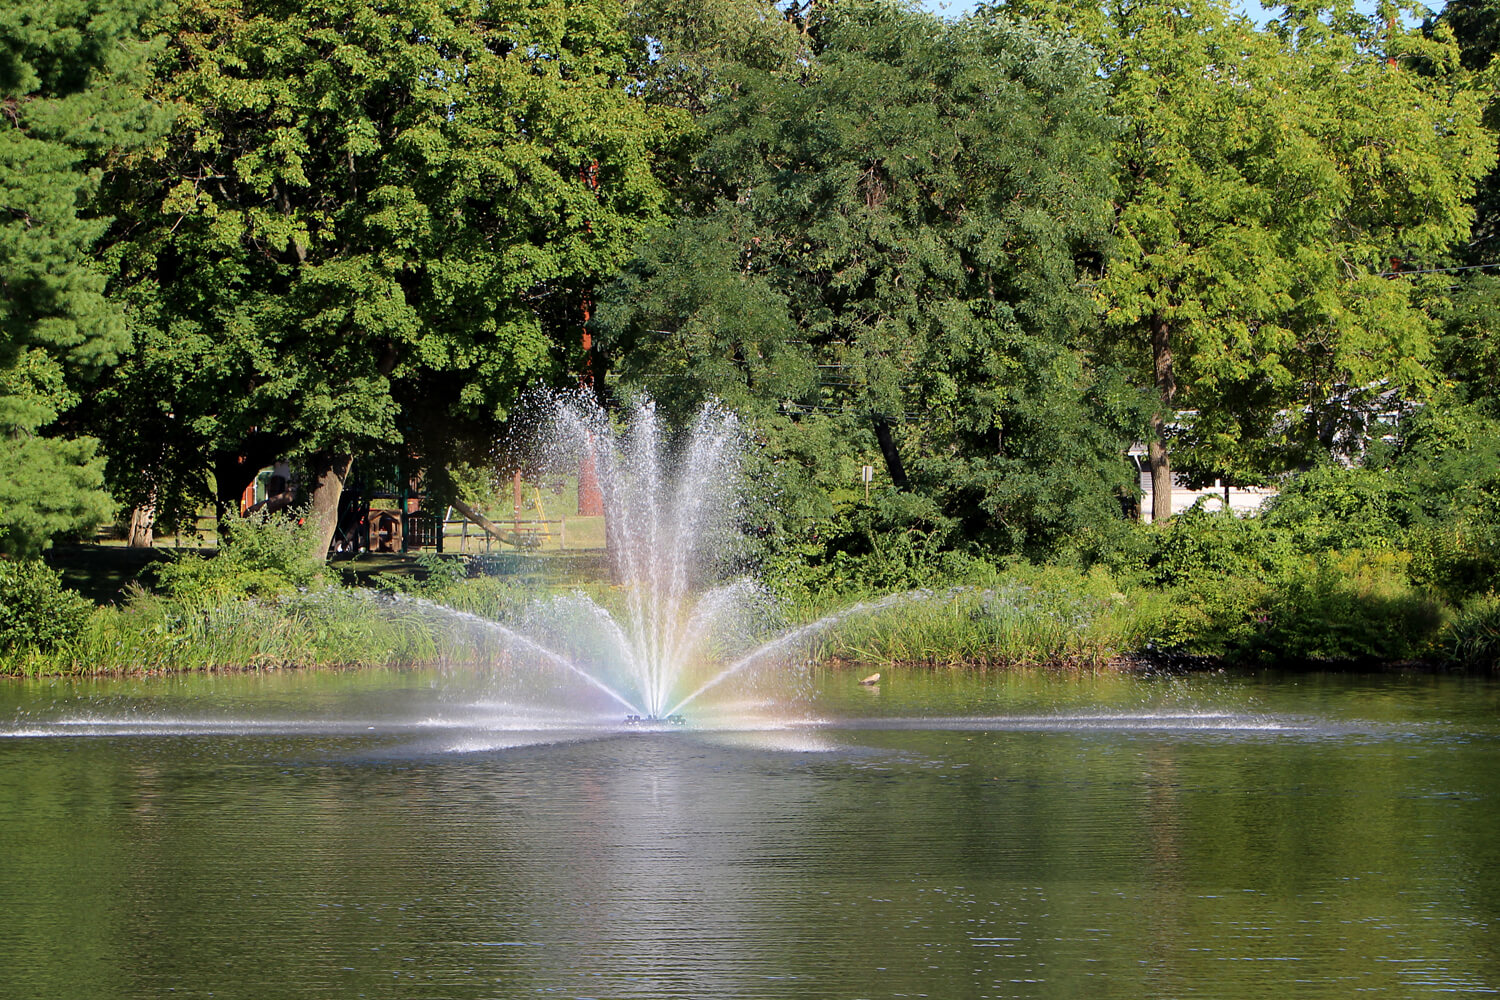 One of Otterbine's Genesis Aerating Fountains at a park